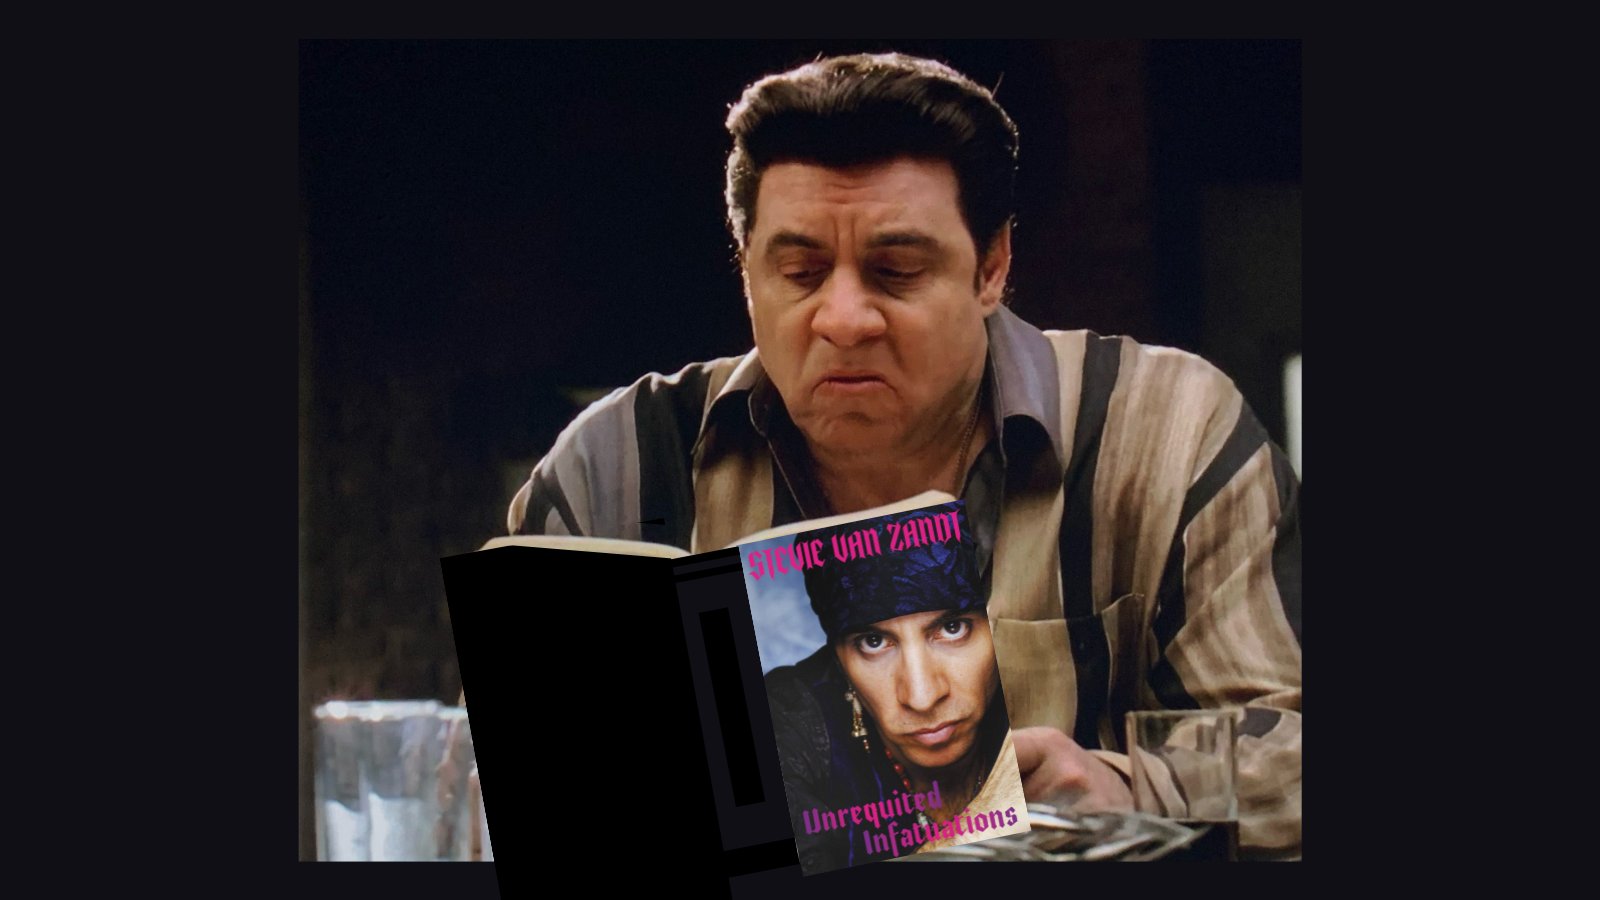 Silvio Dante is reading his new book called Unrequited Infatuations.